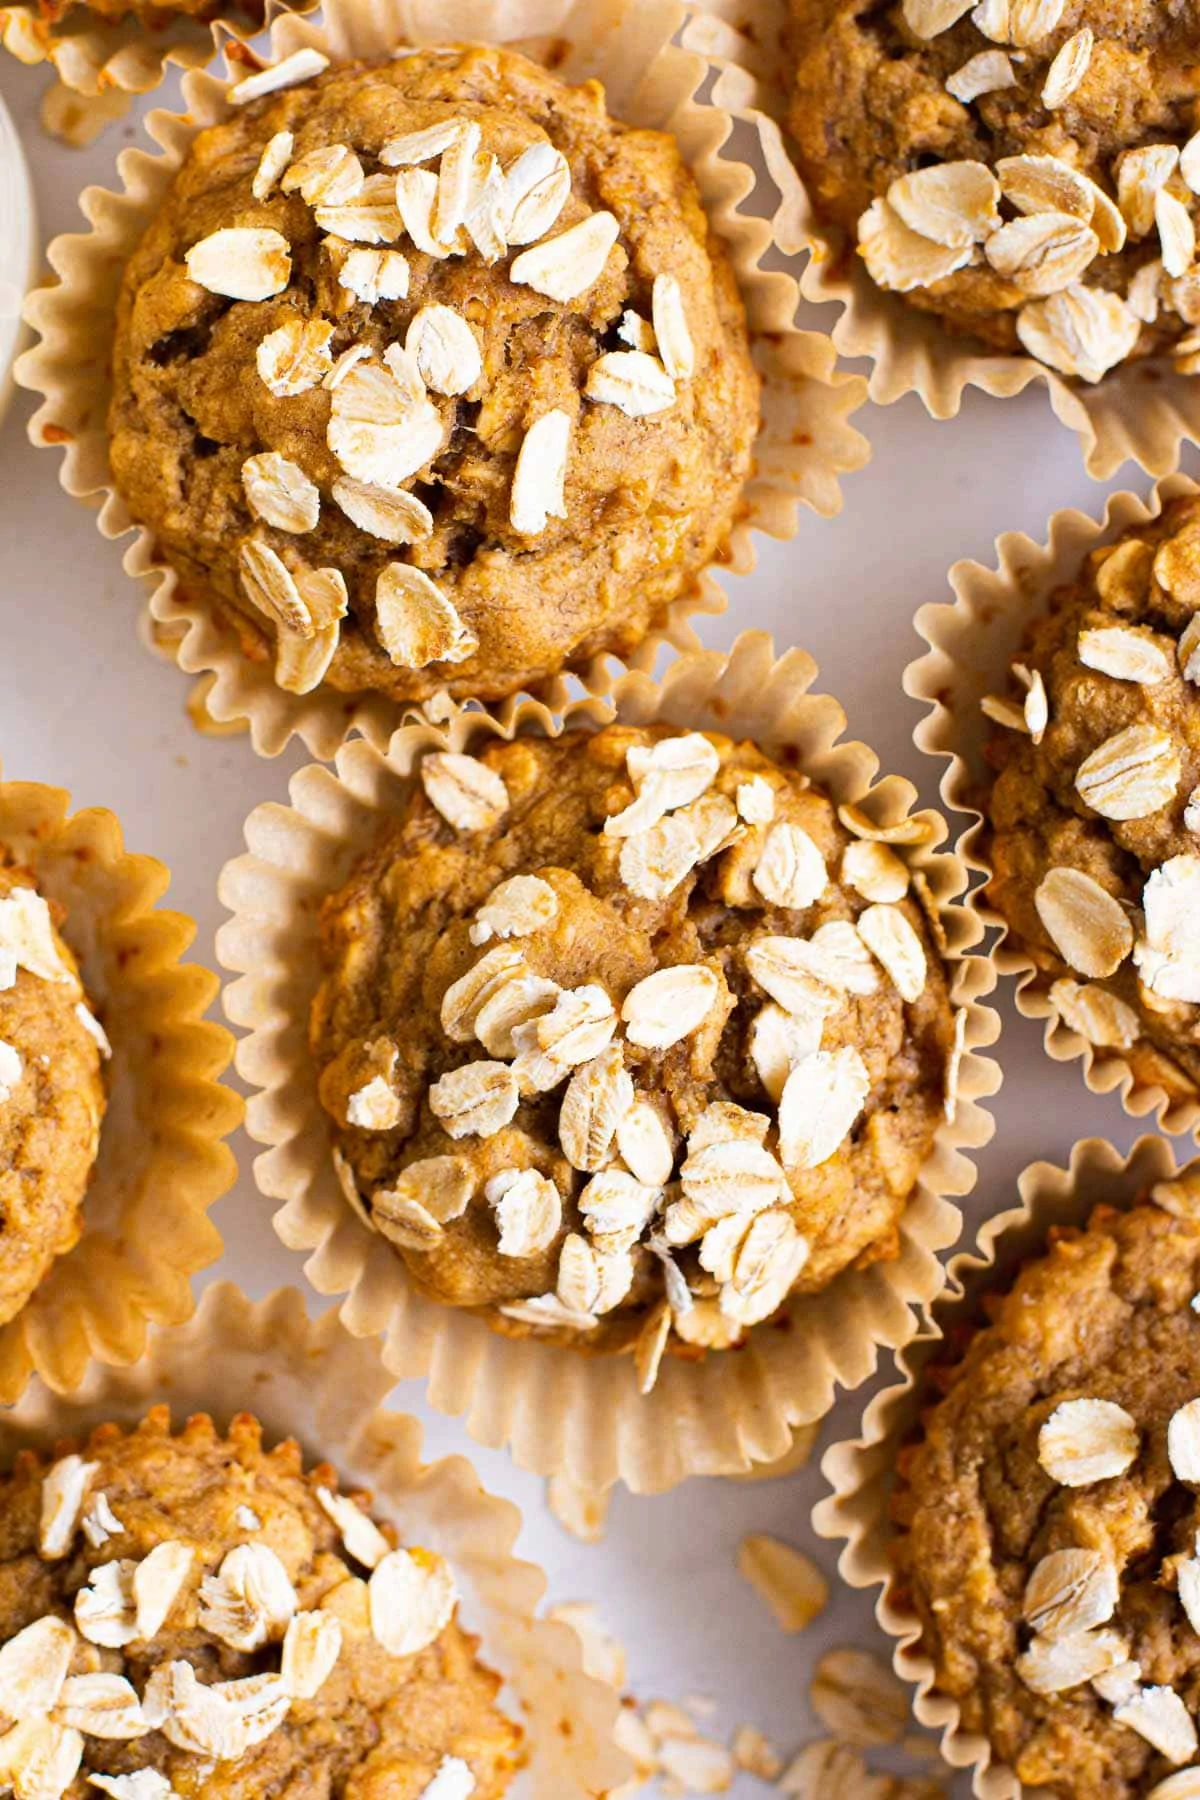 Healthy Oatmeal Muffins" />
	
	
	
	
	
	
	
	
	
	
	
	
	
	
	{"@context":"https://schema.org","@graph":[{"@type":"Organization","@id":"https://ifoodreal.com/#organization","name":"iFoodreal","url":"https://ifoodreal.com/","sameAs":["https://www.facebook.com/iFOODreal/","https://www.instagram.com/ifoodreal/","https://www.pinterest.com/ifoodreal/","https://twitter.com/ifoodreal"],"logo":{"@type":"ImageObject","@id":"https://ifoodreal.com/#logo","inLanguage":"en-US","url":"https://ifoodreal.com/wp-content/uploads/2017/11/ifrLogo-1.png","contentUrl":"https://ifoodreal.com/wp-content/uploads/2017/11/ifrLogo-1.png","width":150,"height":37,"caption":"iFoodreal"},"image":{"@id":"https://ifoodreal.com/#logo"}},{"@type":"WebSite","@id":"https://ifoodreal.com/#website","url":"https://ifoodreal.com/","name":"iFOODreal.com","description":"","publisher":{"@id":"https://ifoodreal.com/#organization"},"potentialAction":[{"@type":"SearchAction","target":{"@type":"EntryPoint","urlTemplate":"https://ifoodreal.com/?s={search_term_string}"},"query-input":"required name=search_term_string"}],"inLanguage":"en-US"},{"@type":"ImageObject","@id":"https://ifoodreal.com/healthy-oatmeal-muffins/#primaryimage","inLanguage":"en-US","url":"https://ifoodreal.com/wp-content/uploads/2022/02/fg-healthy-oatmeal-muffins.jpg","contentUrl":"https://ifoodreal.com/wp-content/uploads/2022/02/fg-healthy-oatmeal-muffins.jpg","width":1250,"height":1250,"caption":"healthy oatmeal muffins"},{"@type":["WebPage","FAQPage"],"@id":"https://ifoodreal.com/healthy-oatmeal-muffins/#webpage","url":"https://ifoodreal.com/healthy-oatmeal-muffins/","name":"Healthy Oatmeal Muffins